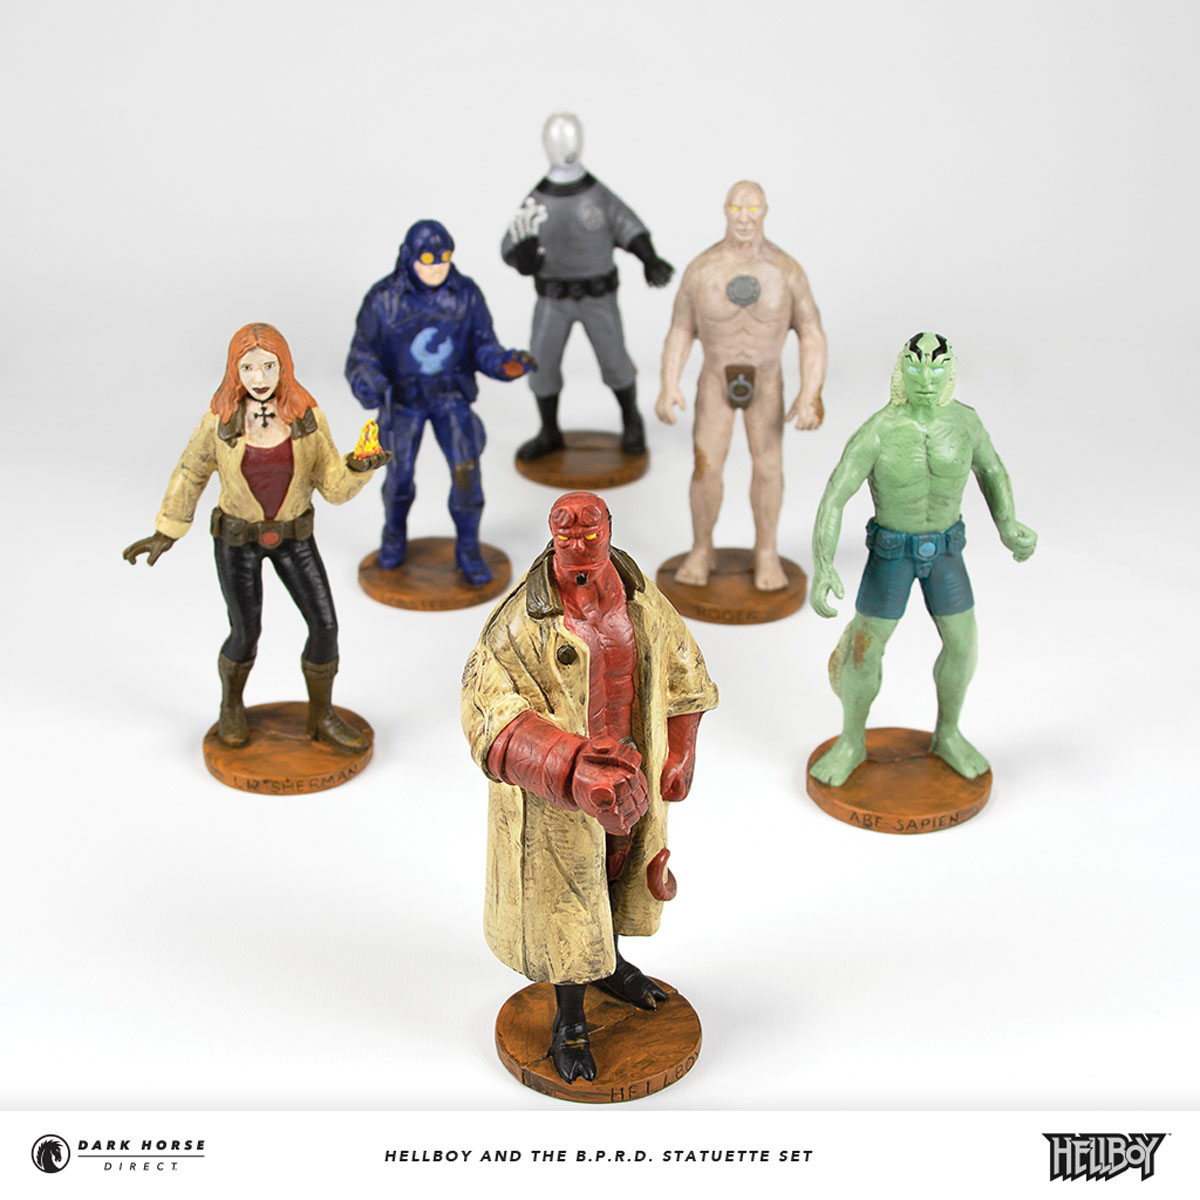 Hellboy and the B.D.P.D. Statuette Set